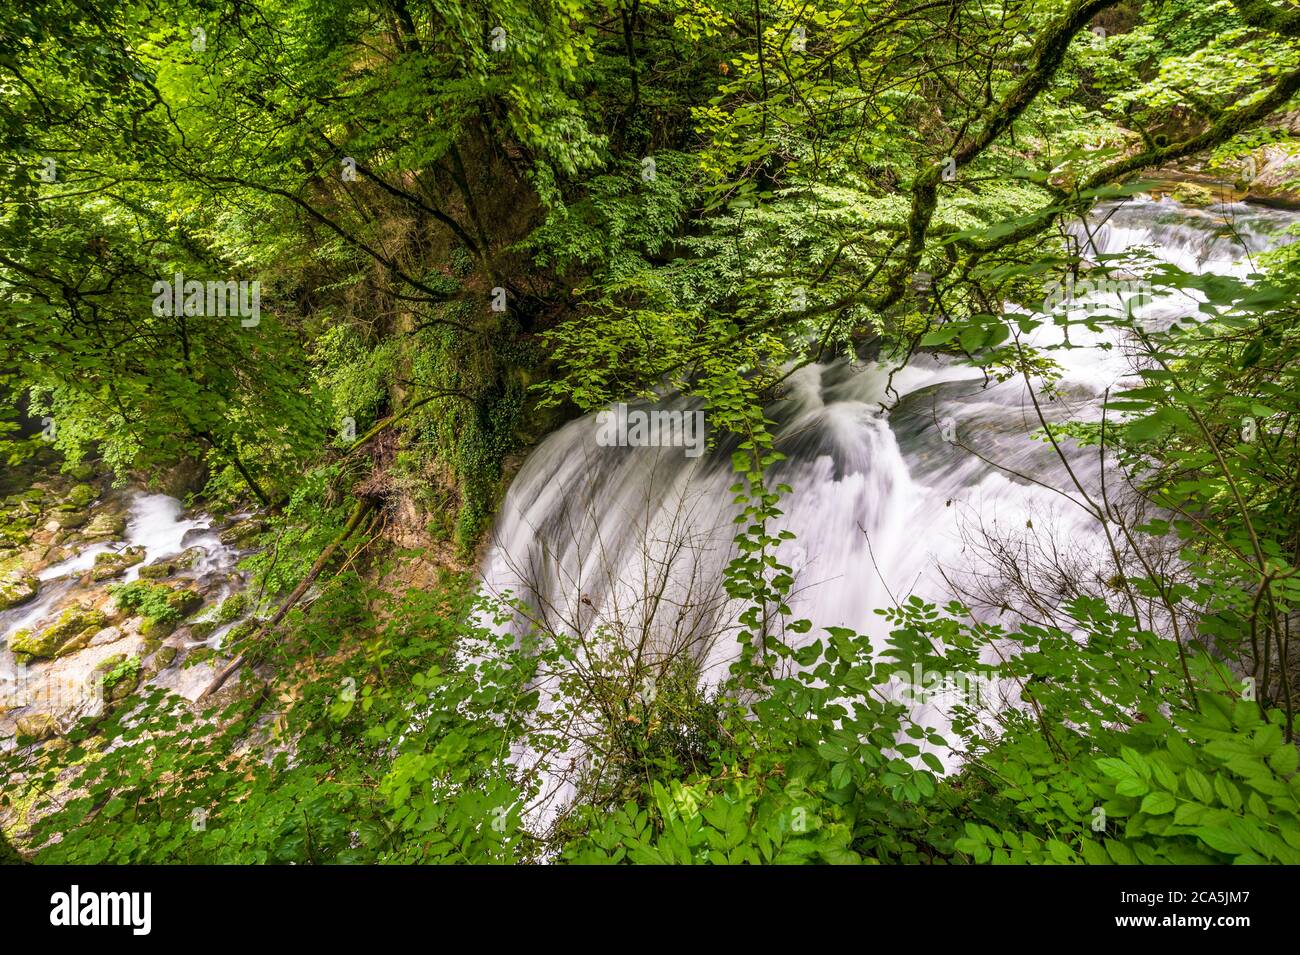 France, Isere, Vercors Regional Park, hike to the Cuves de Sassenage on the banks of the Furon river Stock Photo